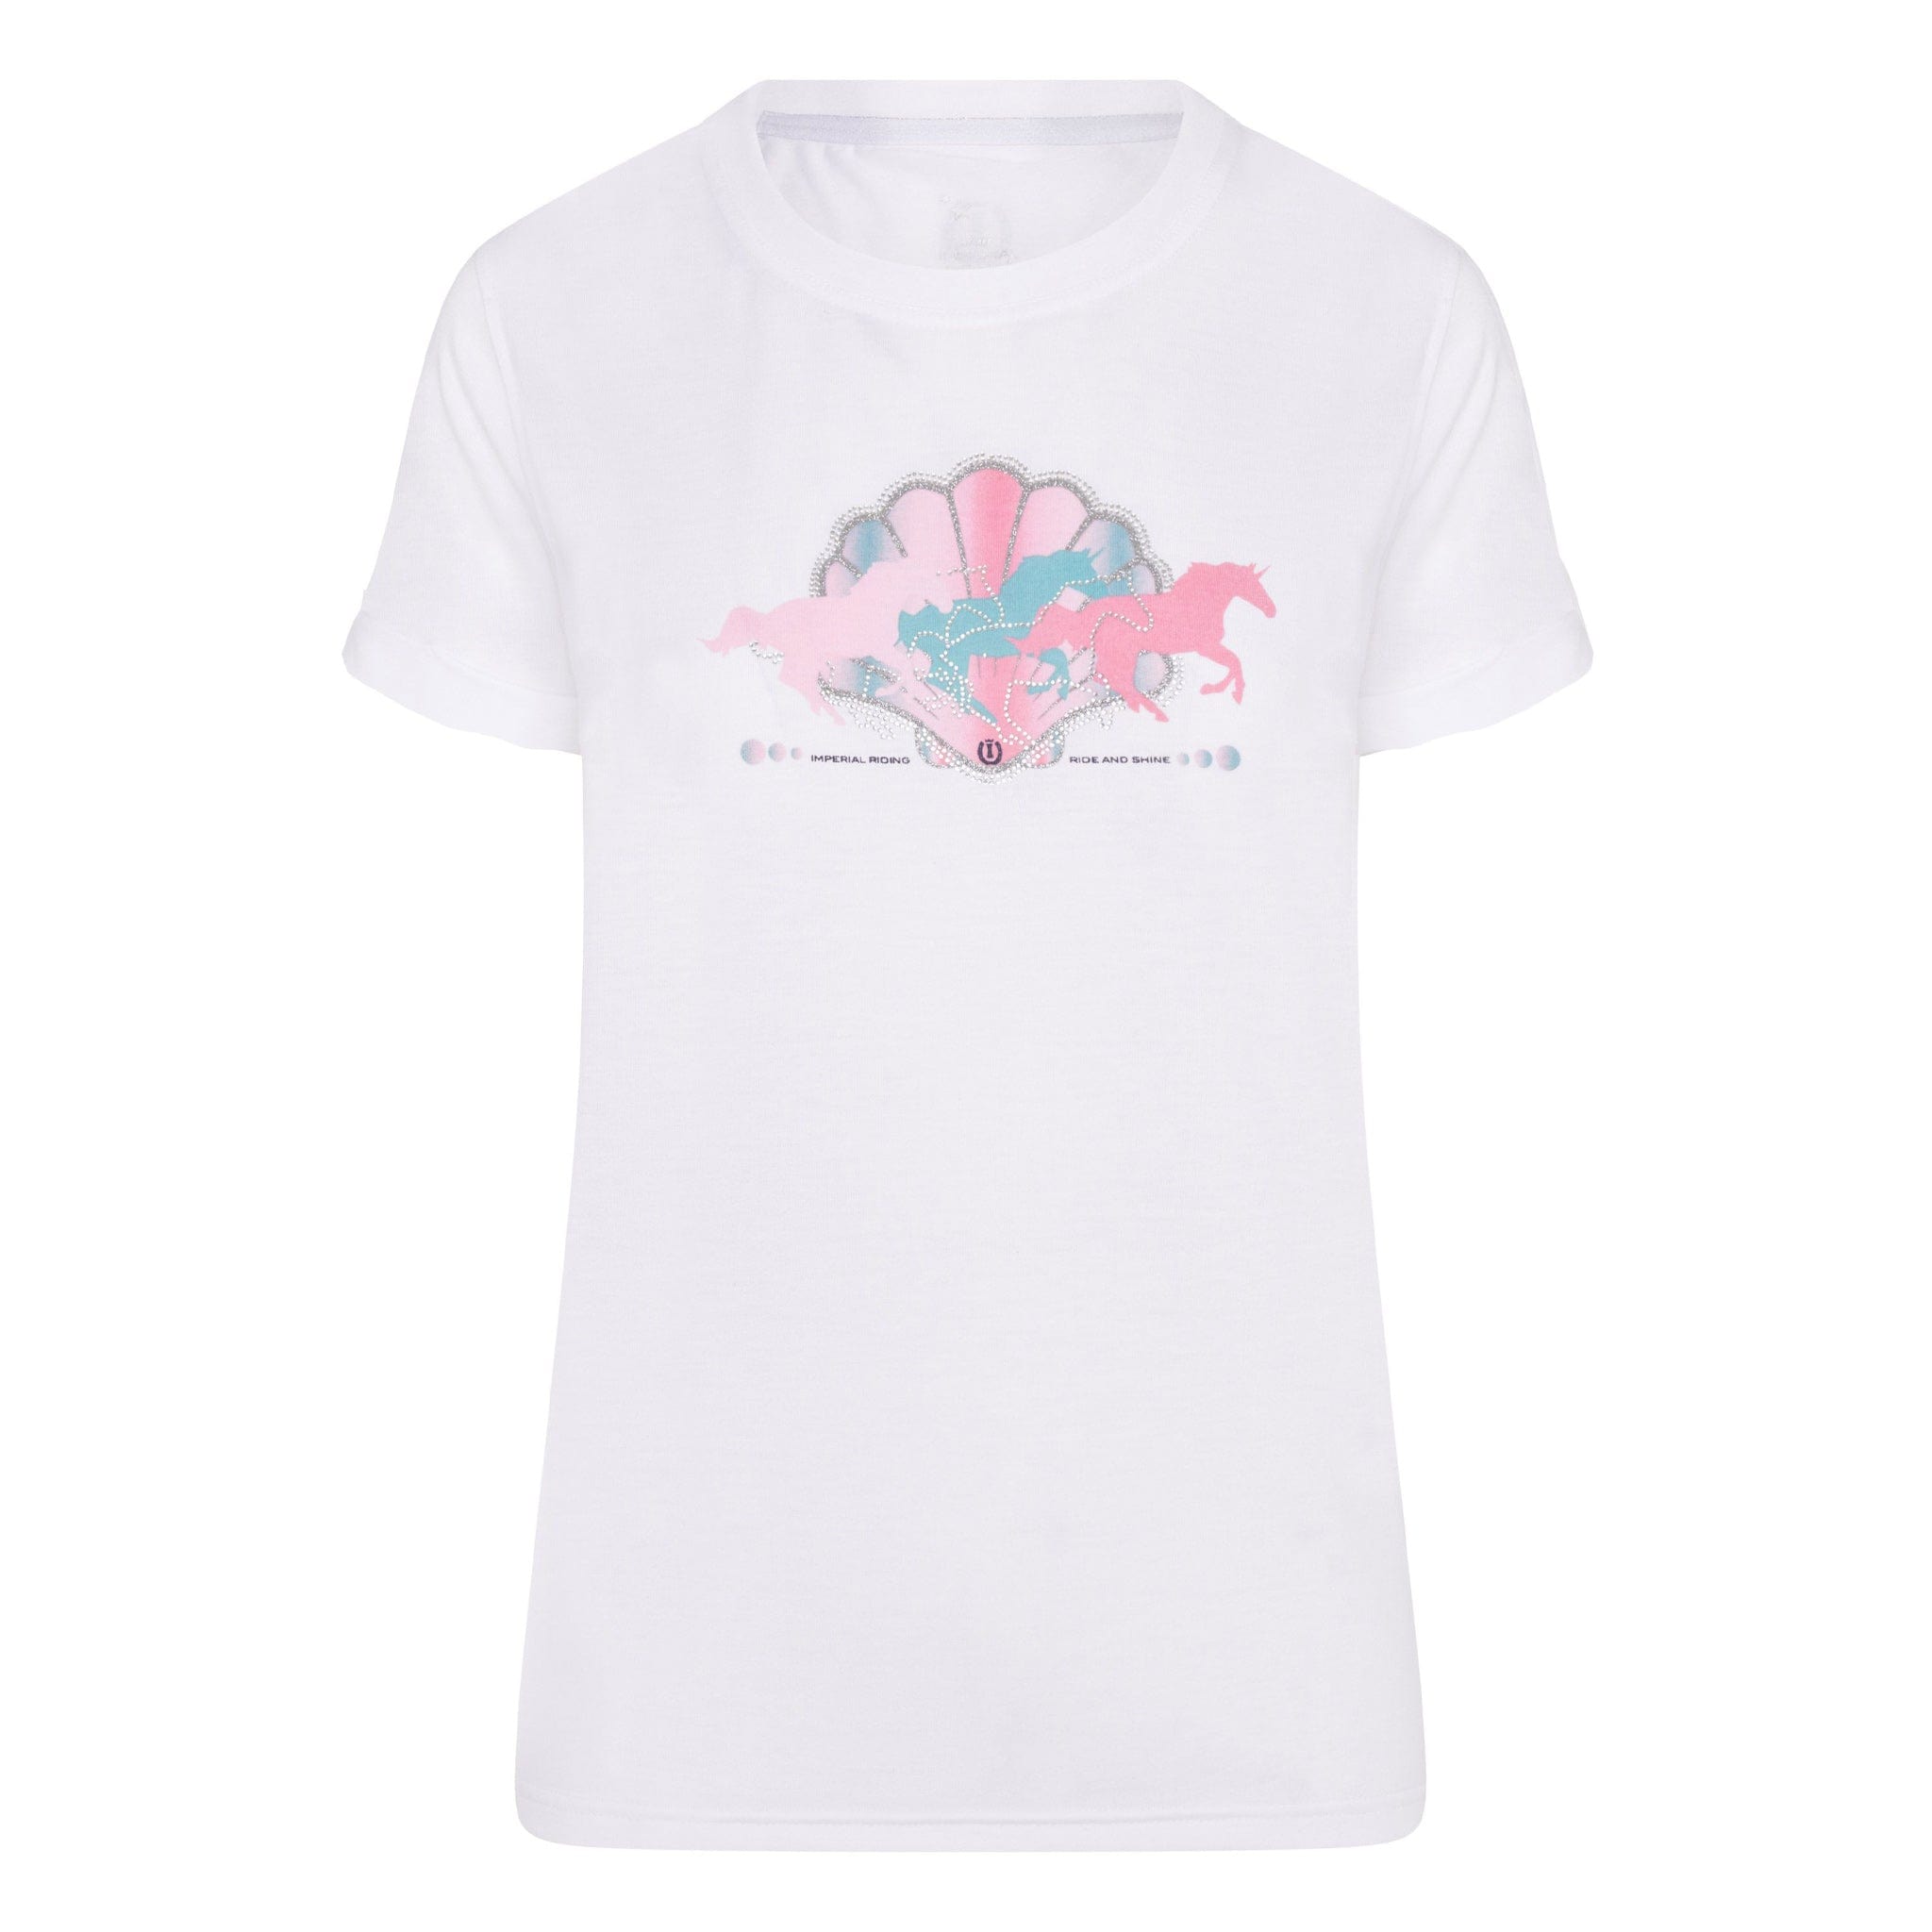 Imperial Riding Horse and Mermaids Short Sleeve T-Shirt KL35121019 White Front View